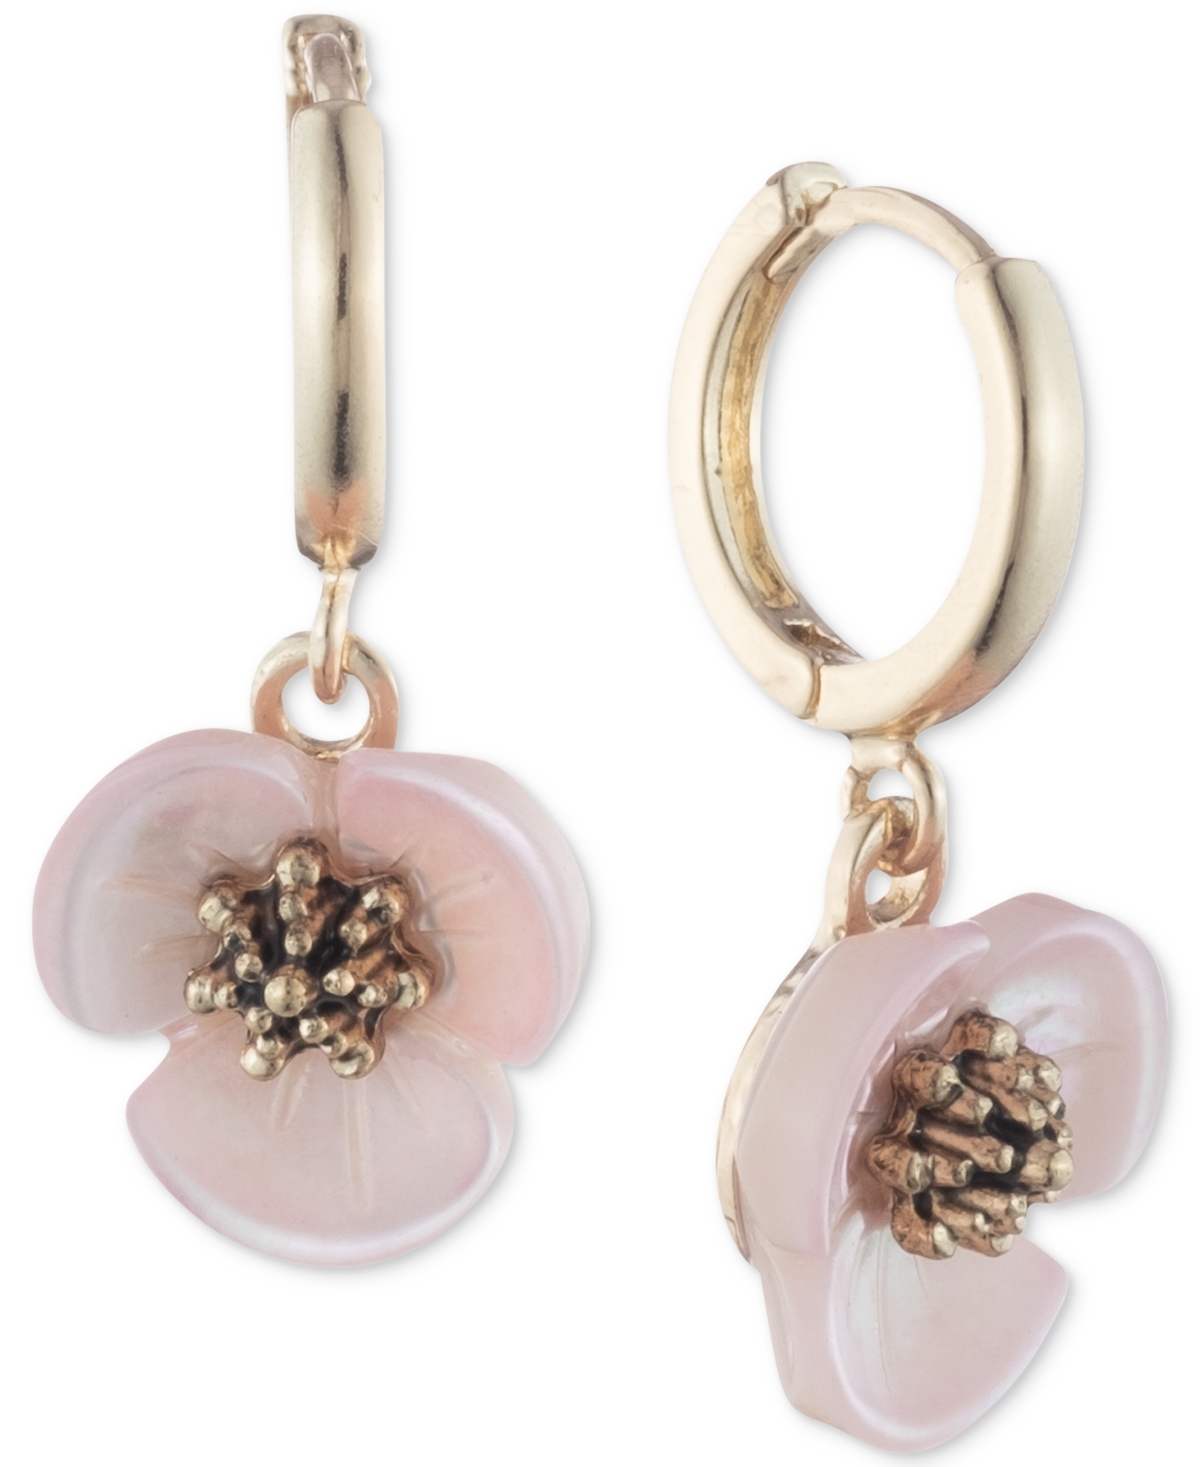 Gold-Tone Imitation Mother-of-Pearl Flower Drop Off Small Hoop Earrings - Pink